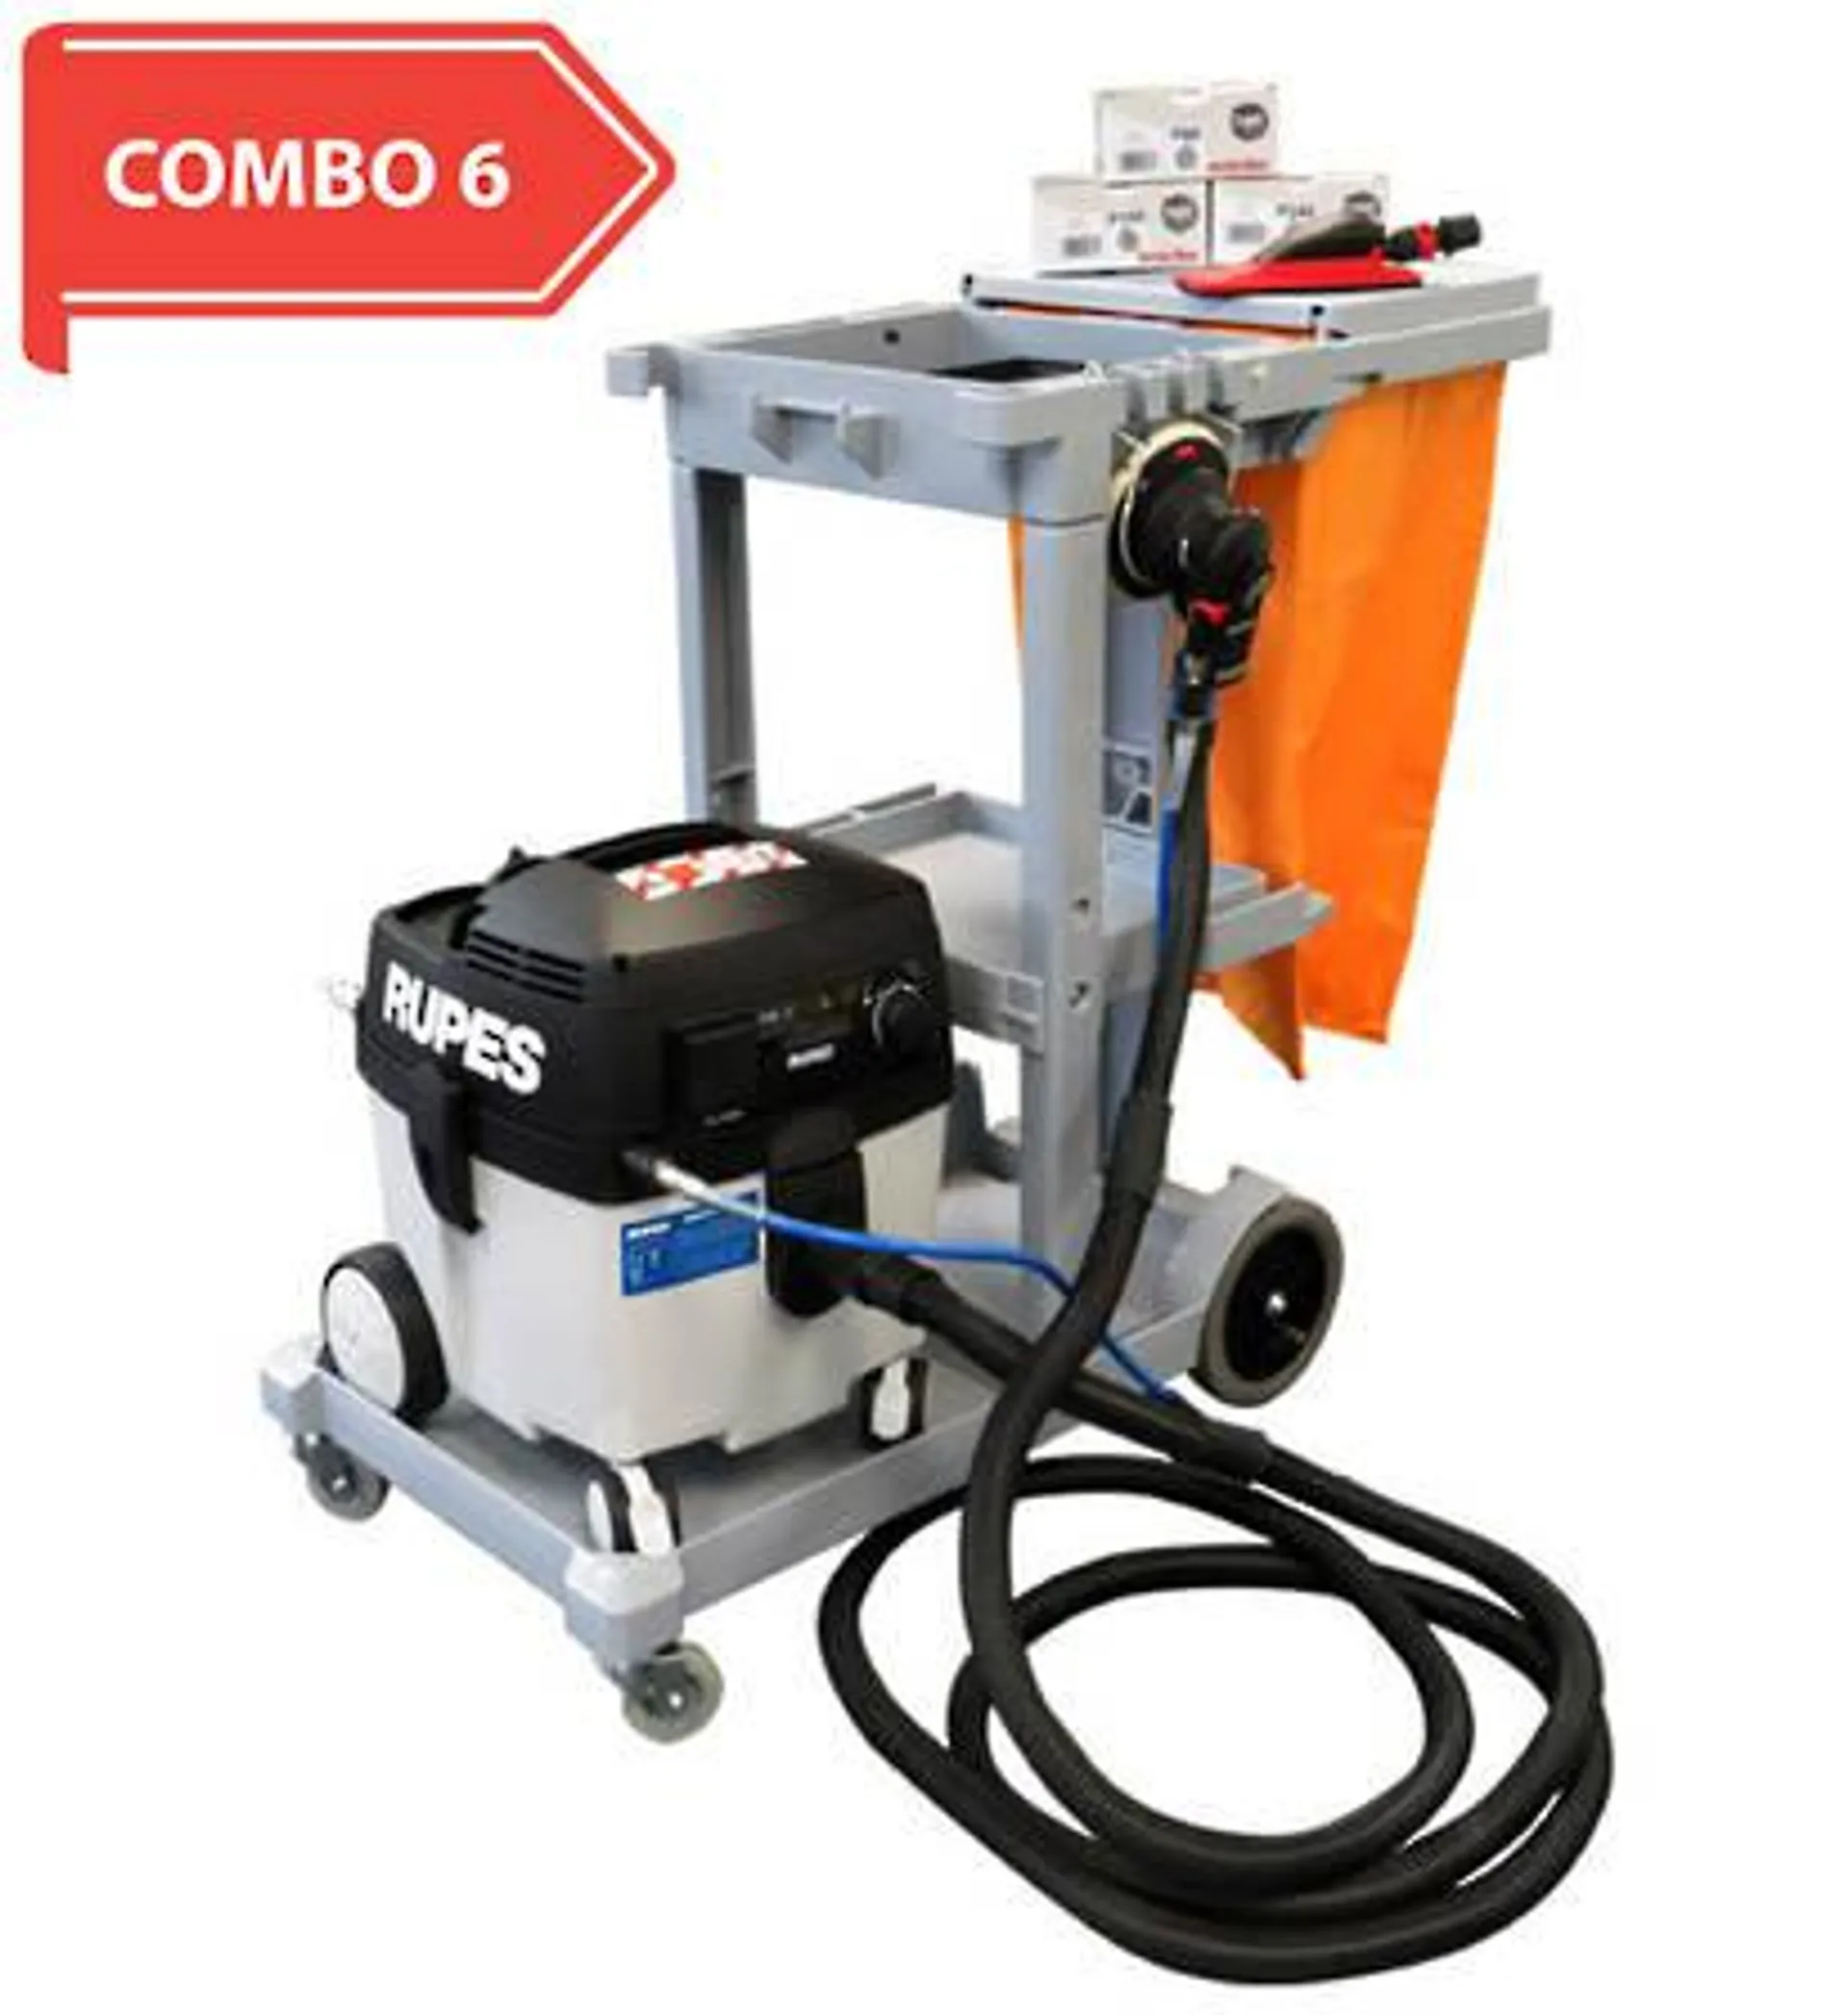 RUPES Smart Repair Electro-Pneumatic Dust Extraction Combo RUS130EPL COMBO 6